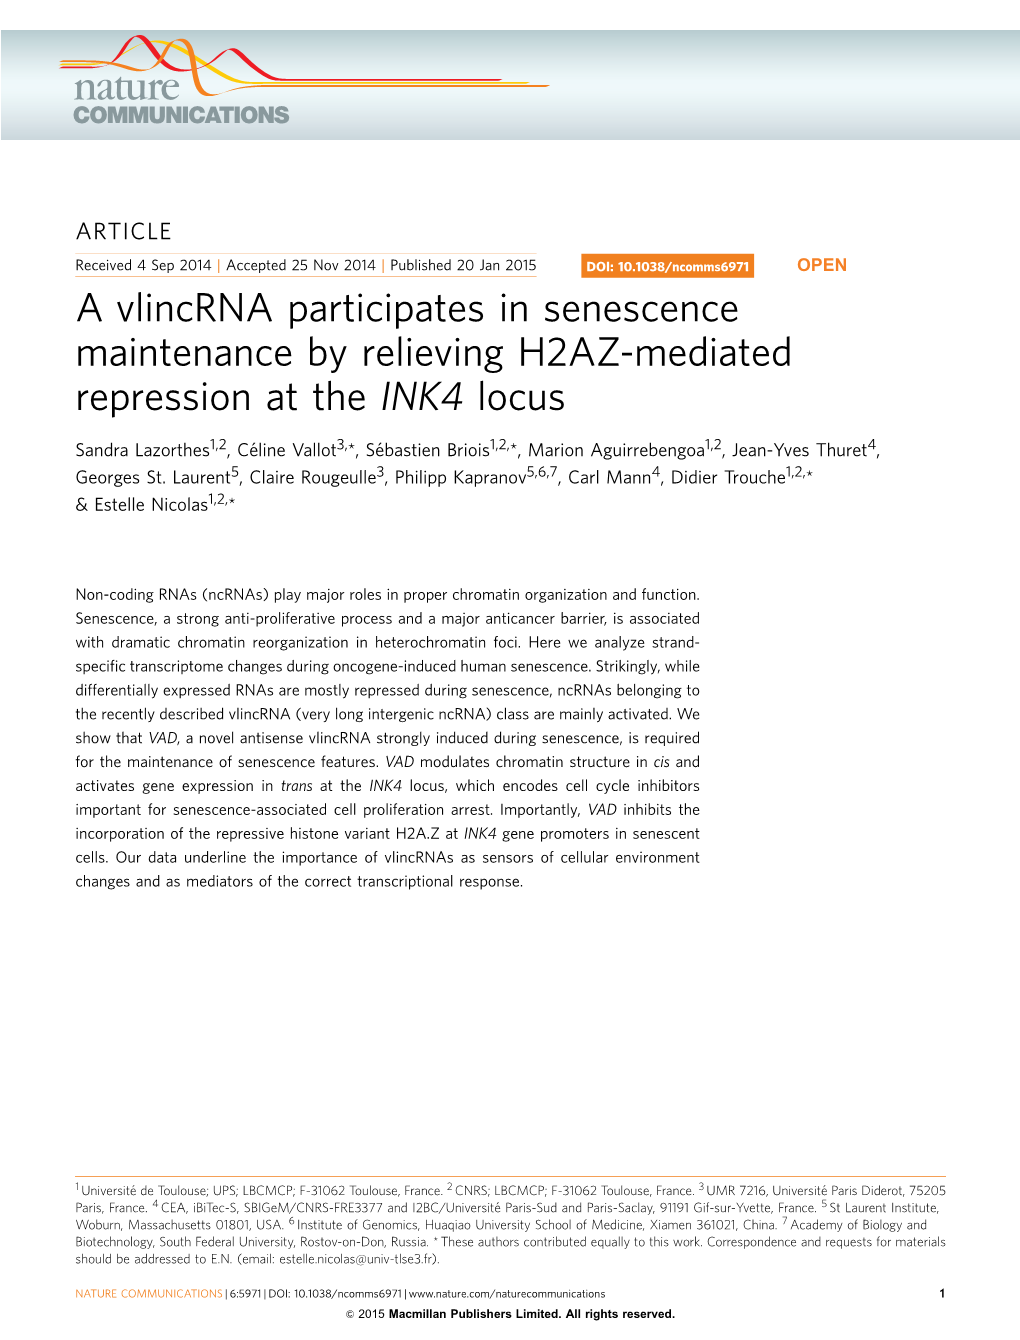 A Vlincrna Participates in Senescence Maintenance by Relieving H2AZ-Mediated Repression at the INK4 Locus